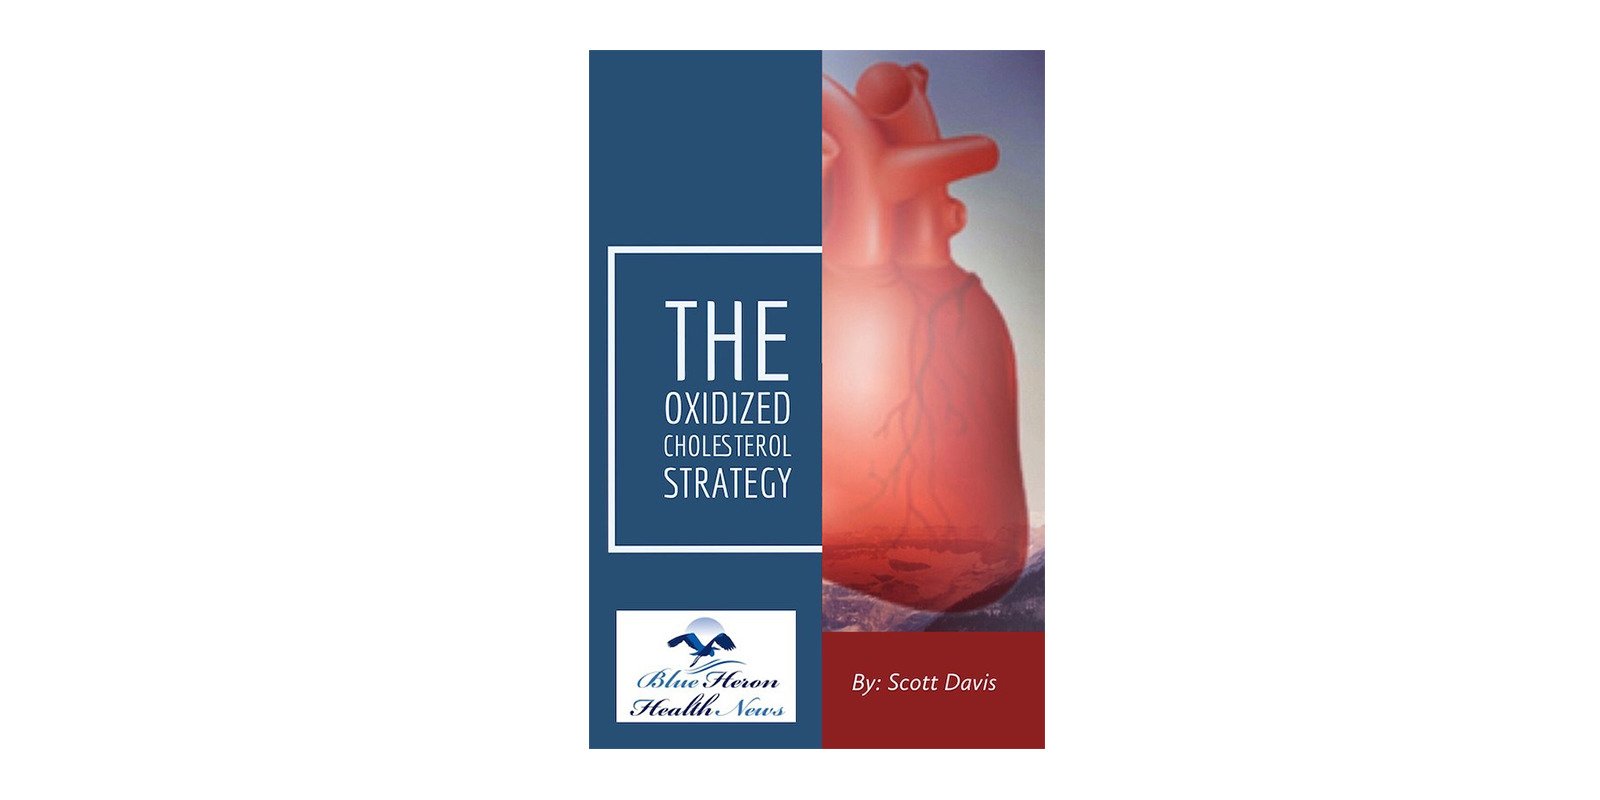 The Oxidized Cholesterol Strategy reviews